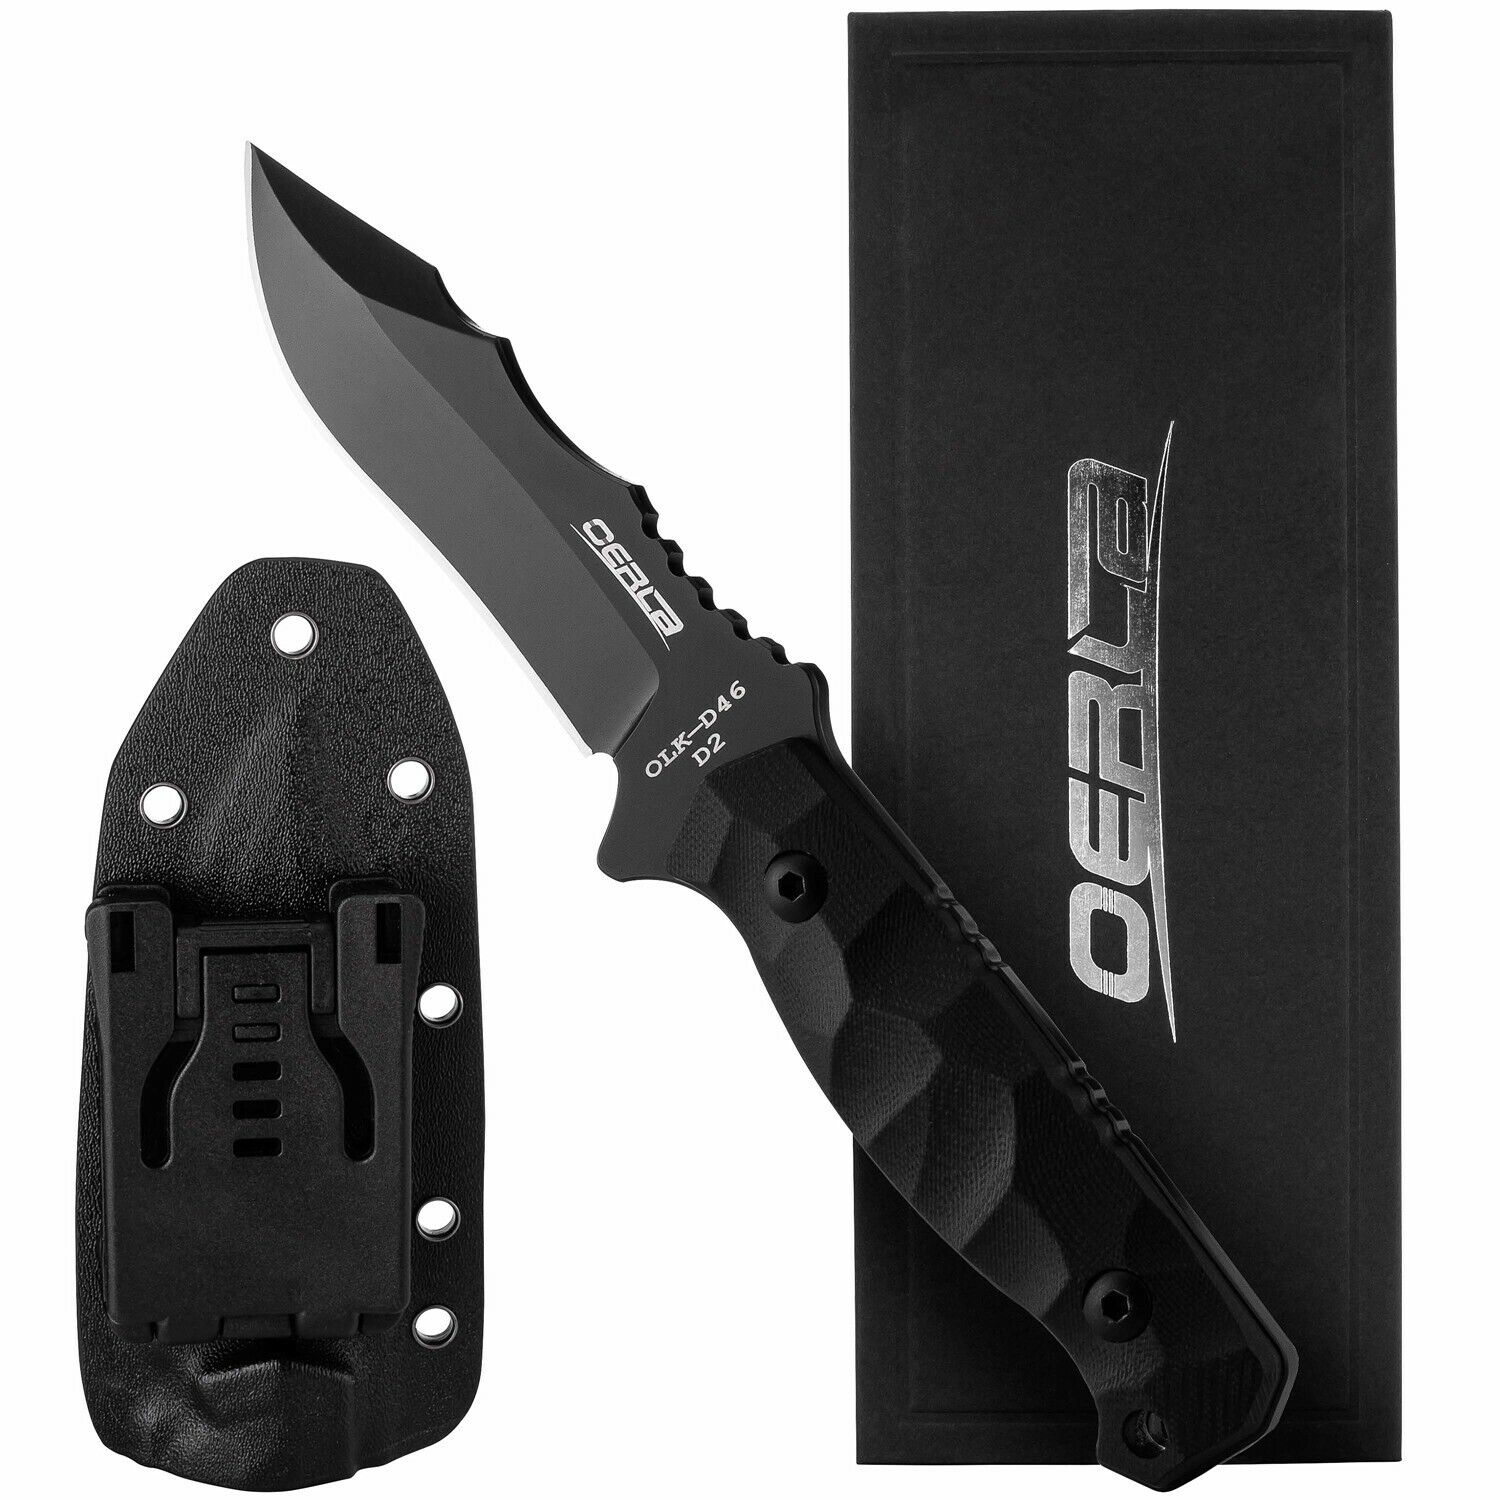 Oerla D2 steel Knife Outdoor Duty Fixed Blade  with G10 Handle and Kydex Sheath